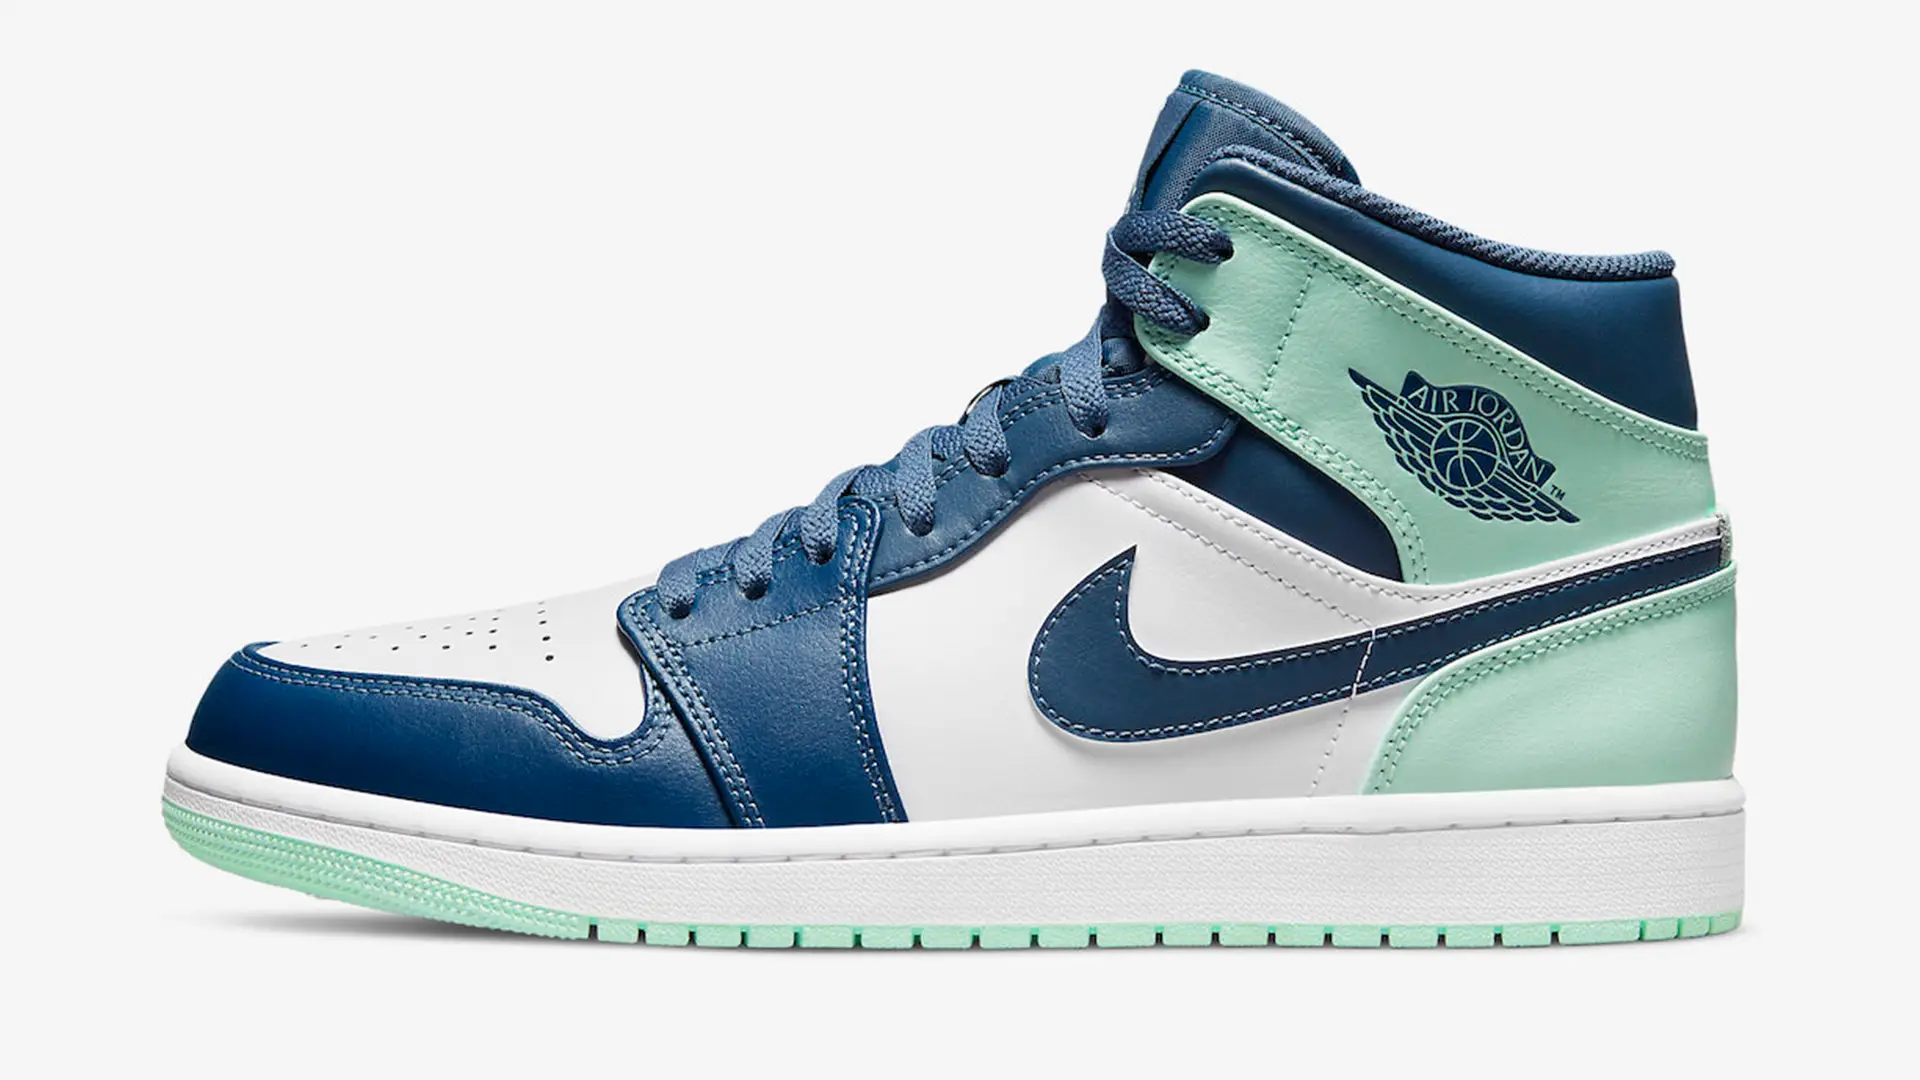 Freshen Up Your Rotation With the Air Jordan 1 Mid 